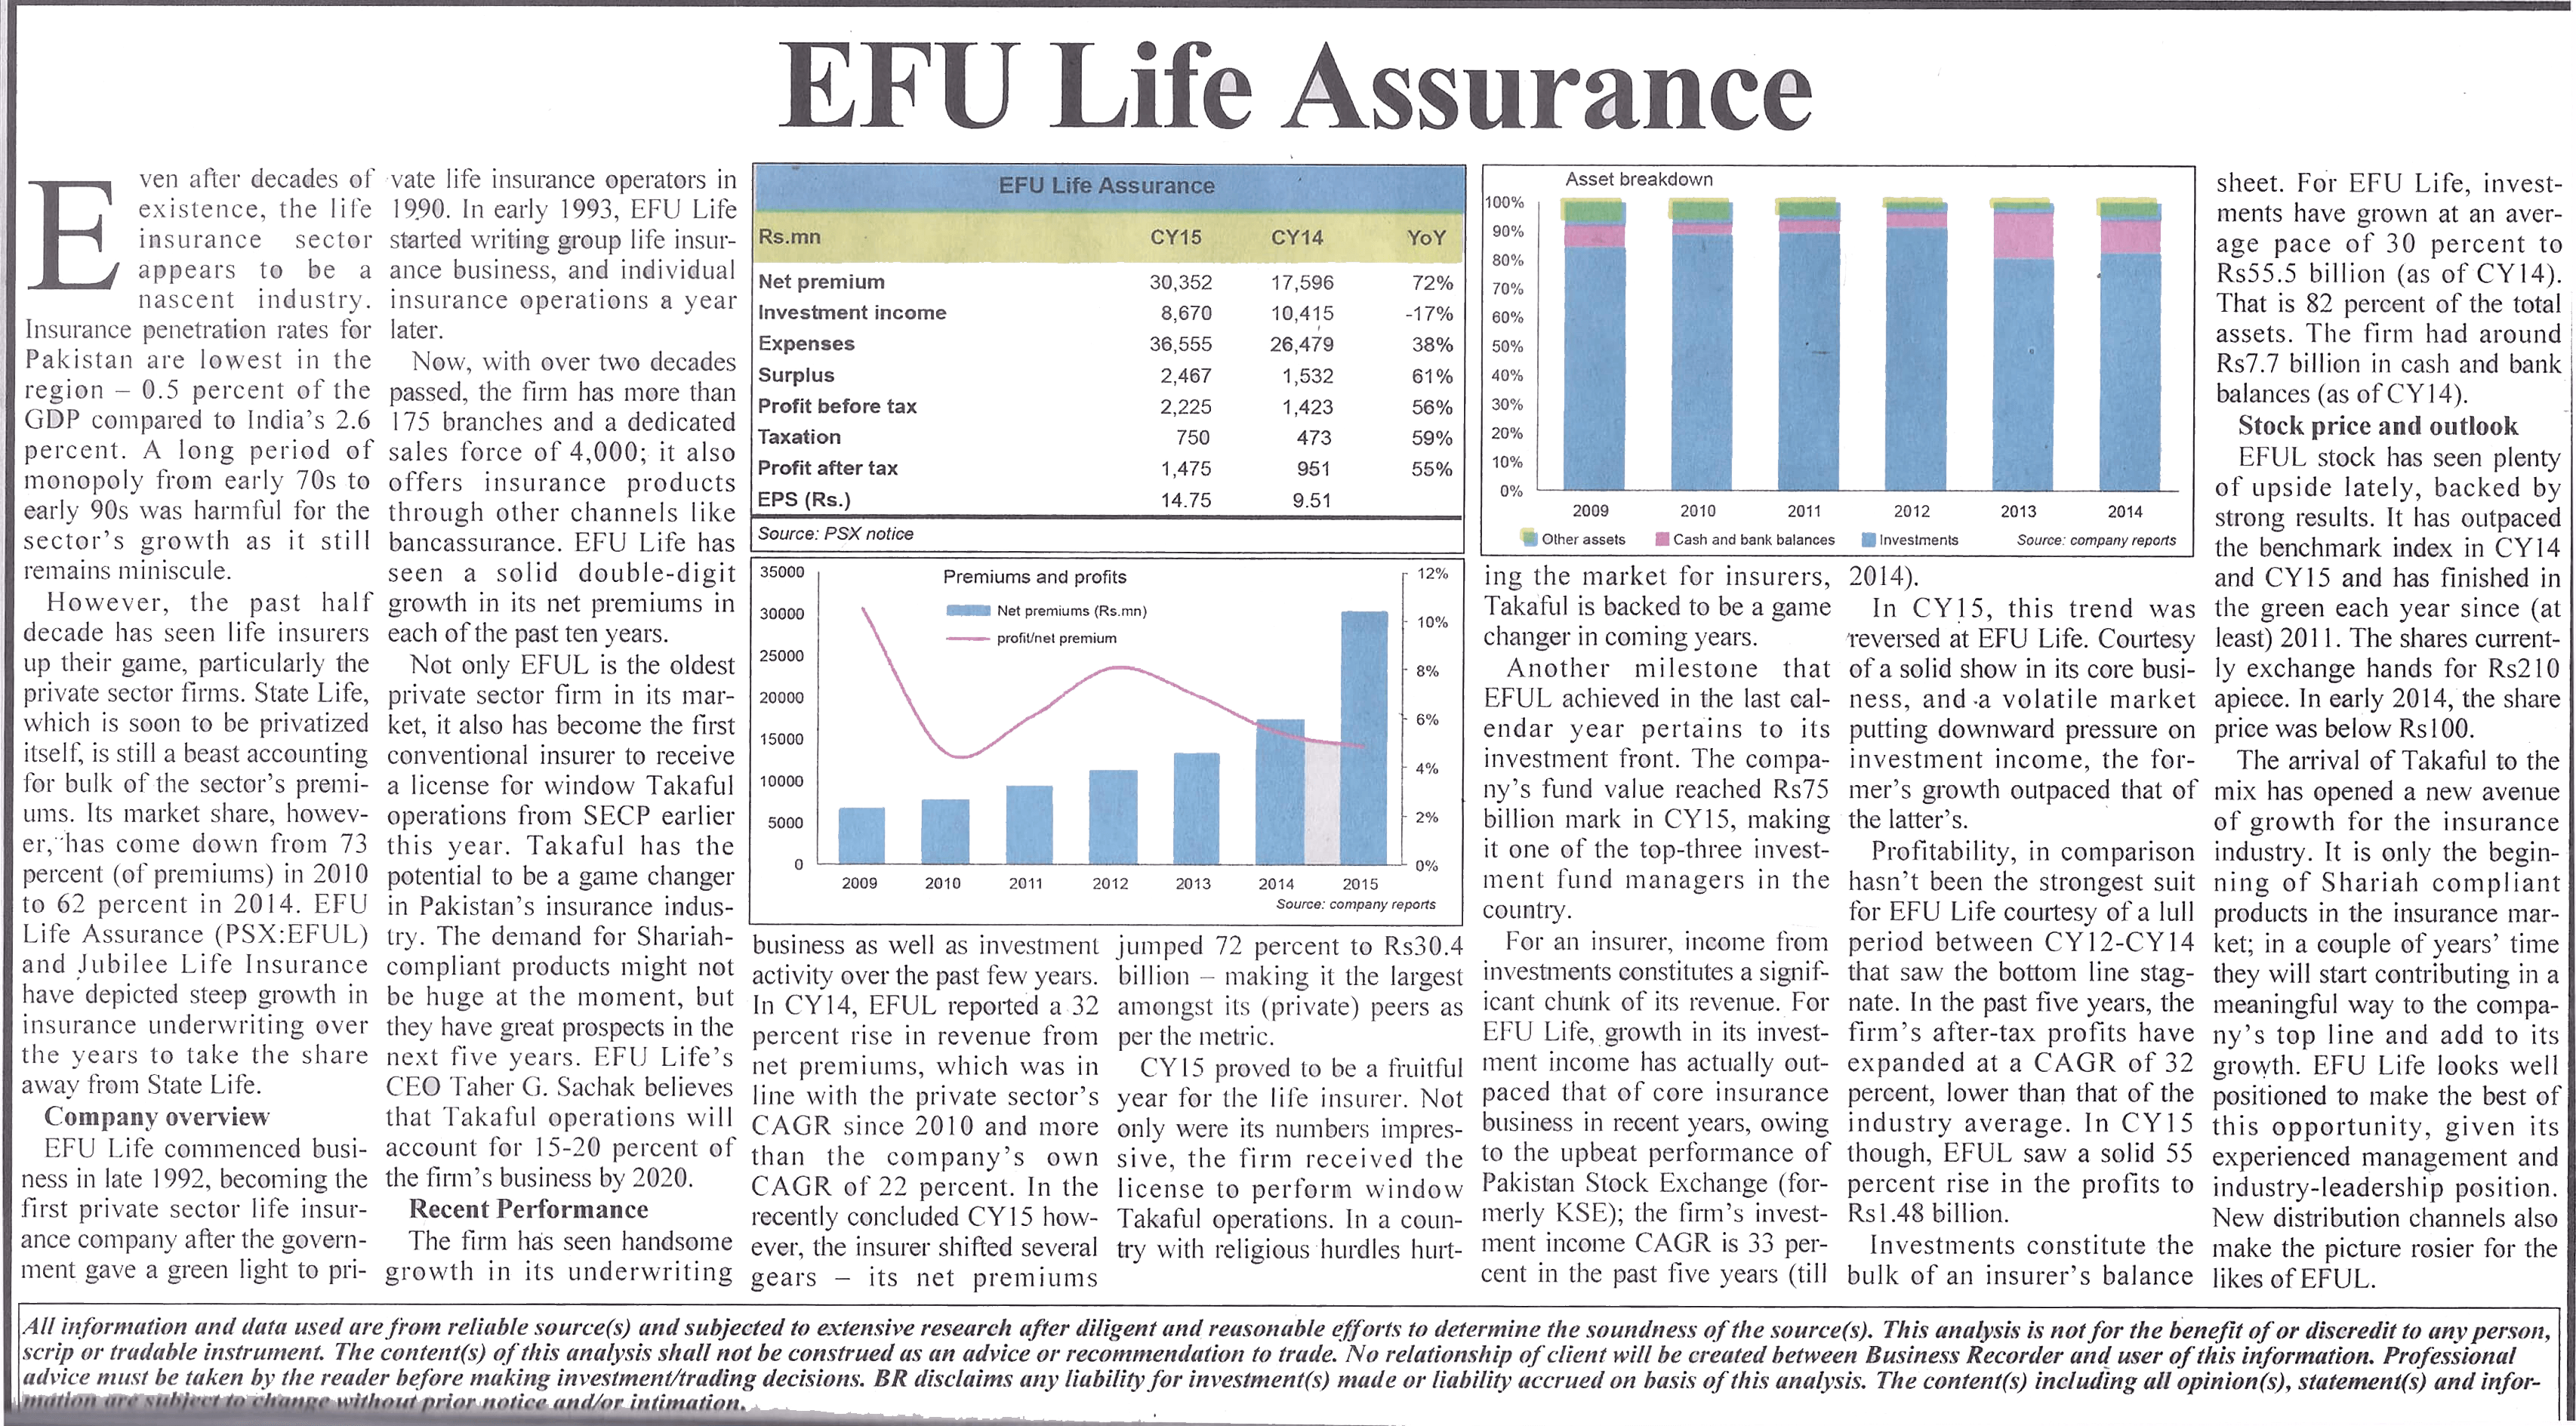 A report on EFU Life's Outstanding Business Performance in Business Recorder